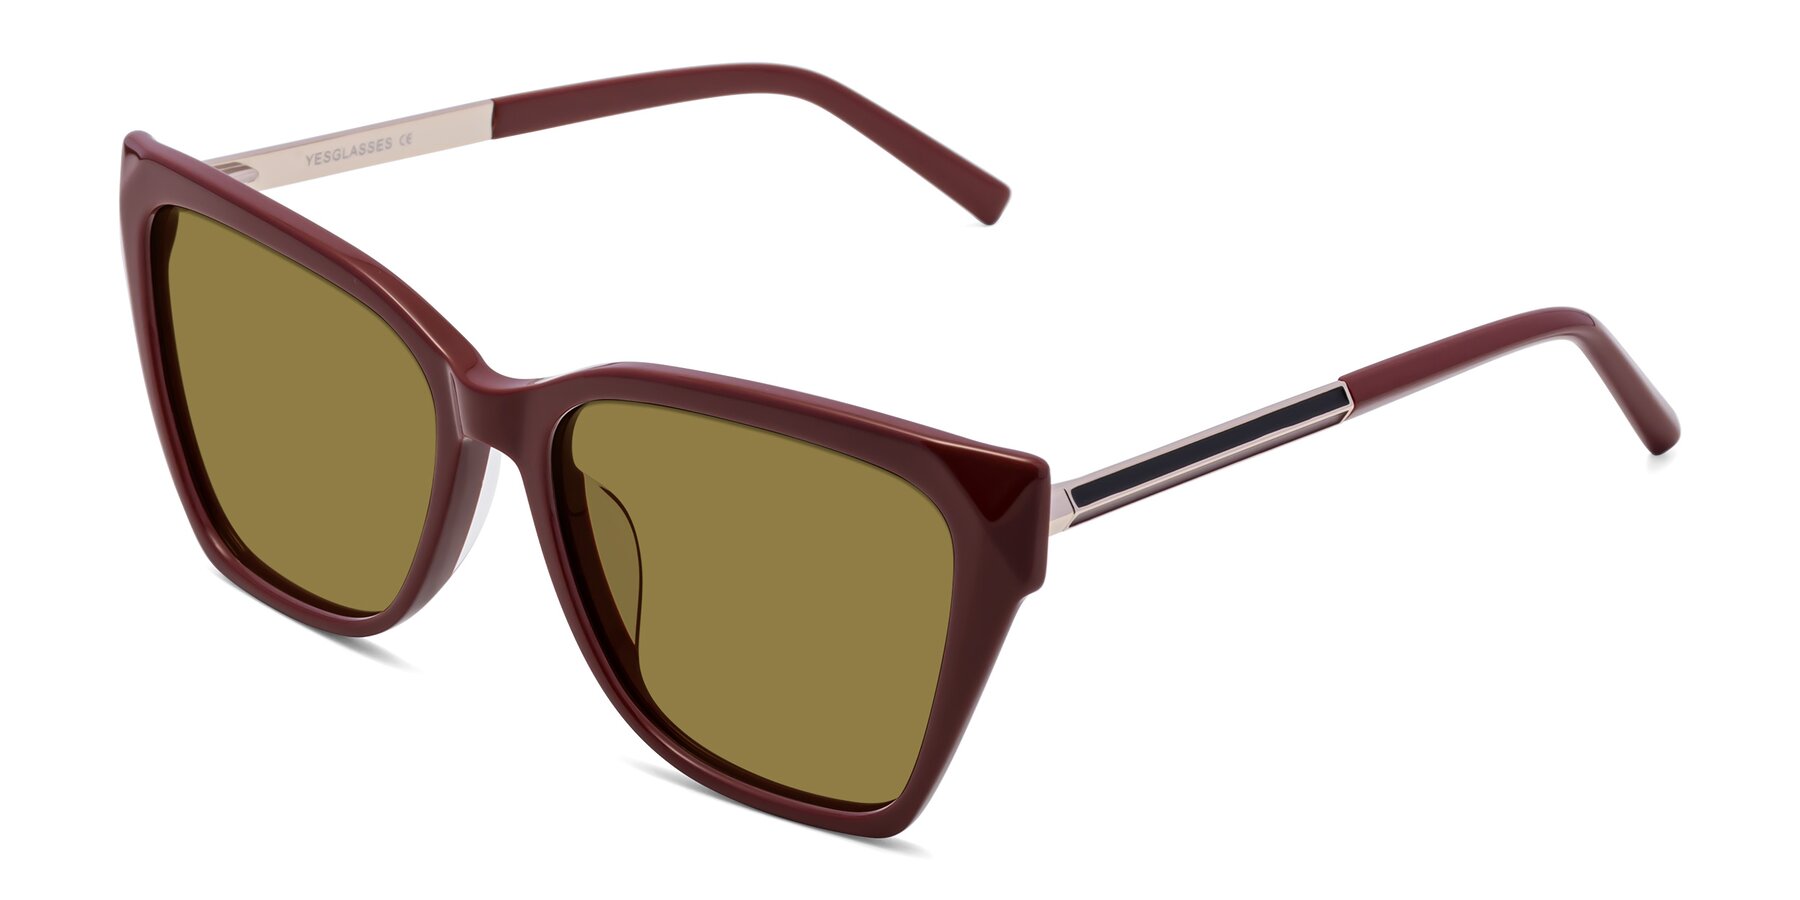 Angle of Swartz in Wine with Brown Polarized Lenses